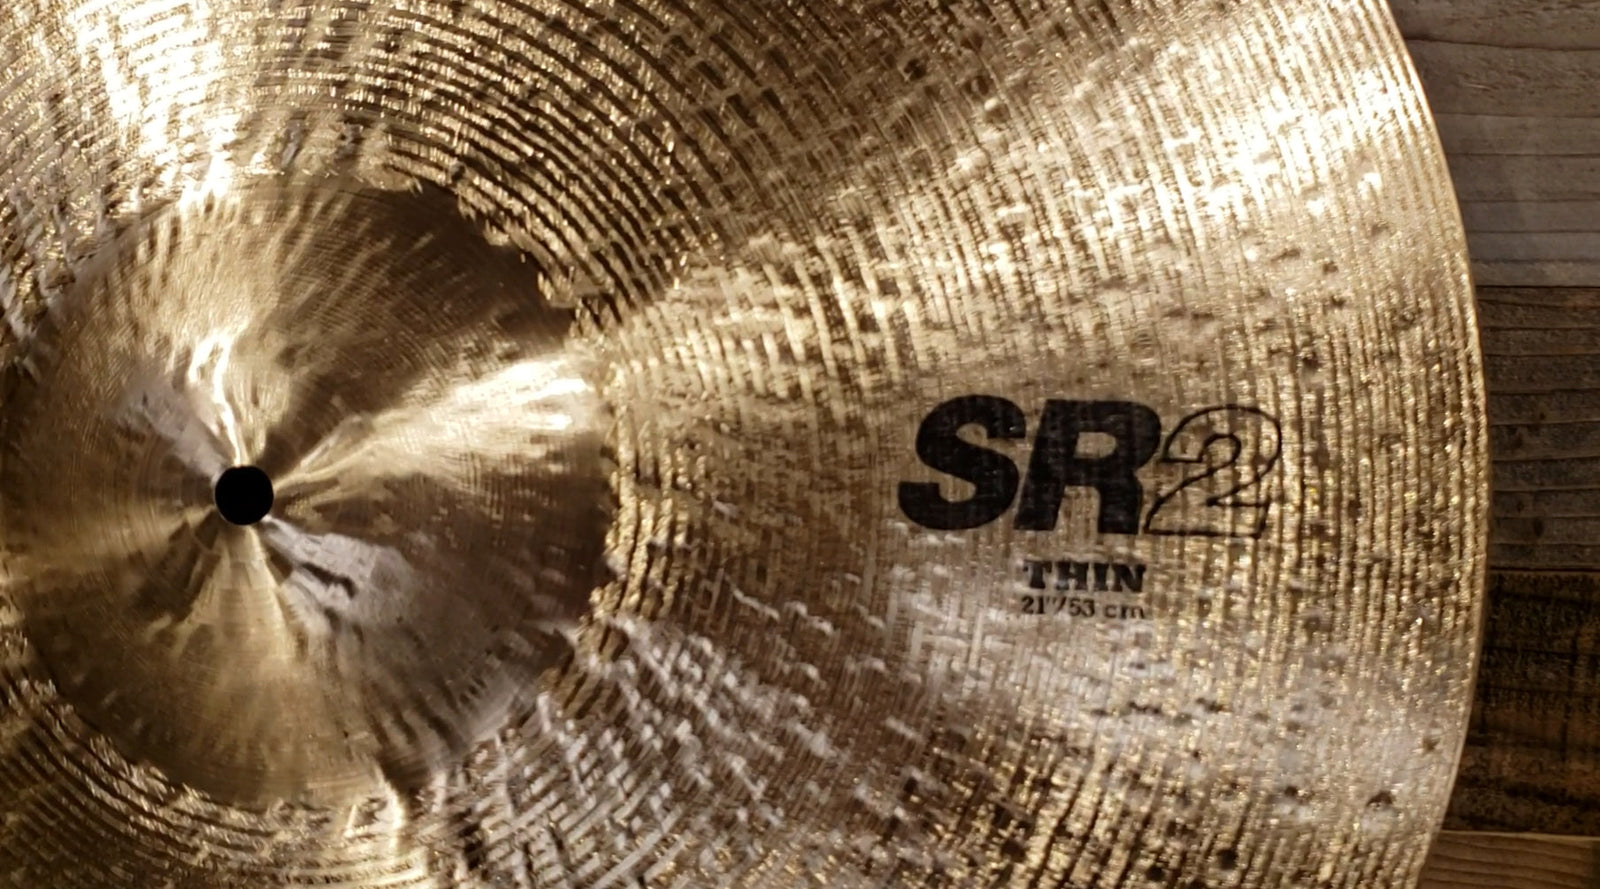 Sabian SR2 Cymbals Review - Incredible Value For Your Buck